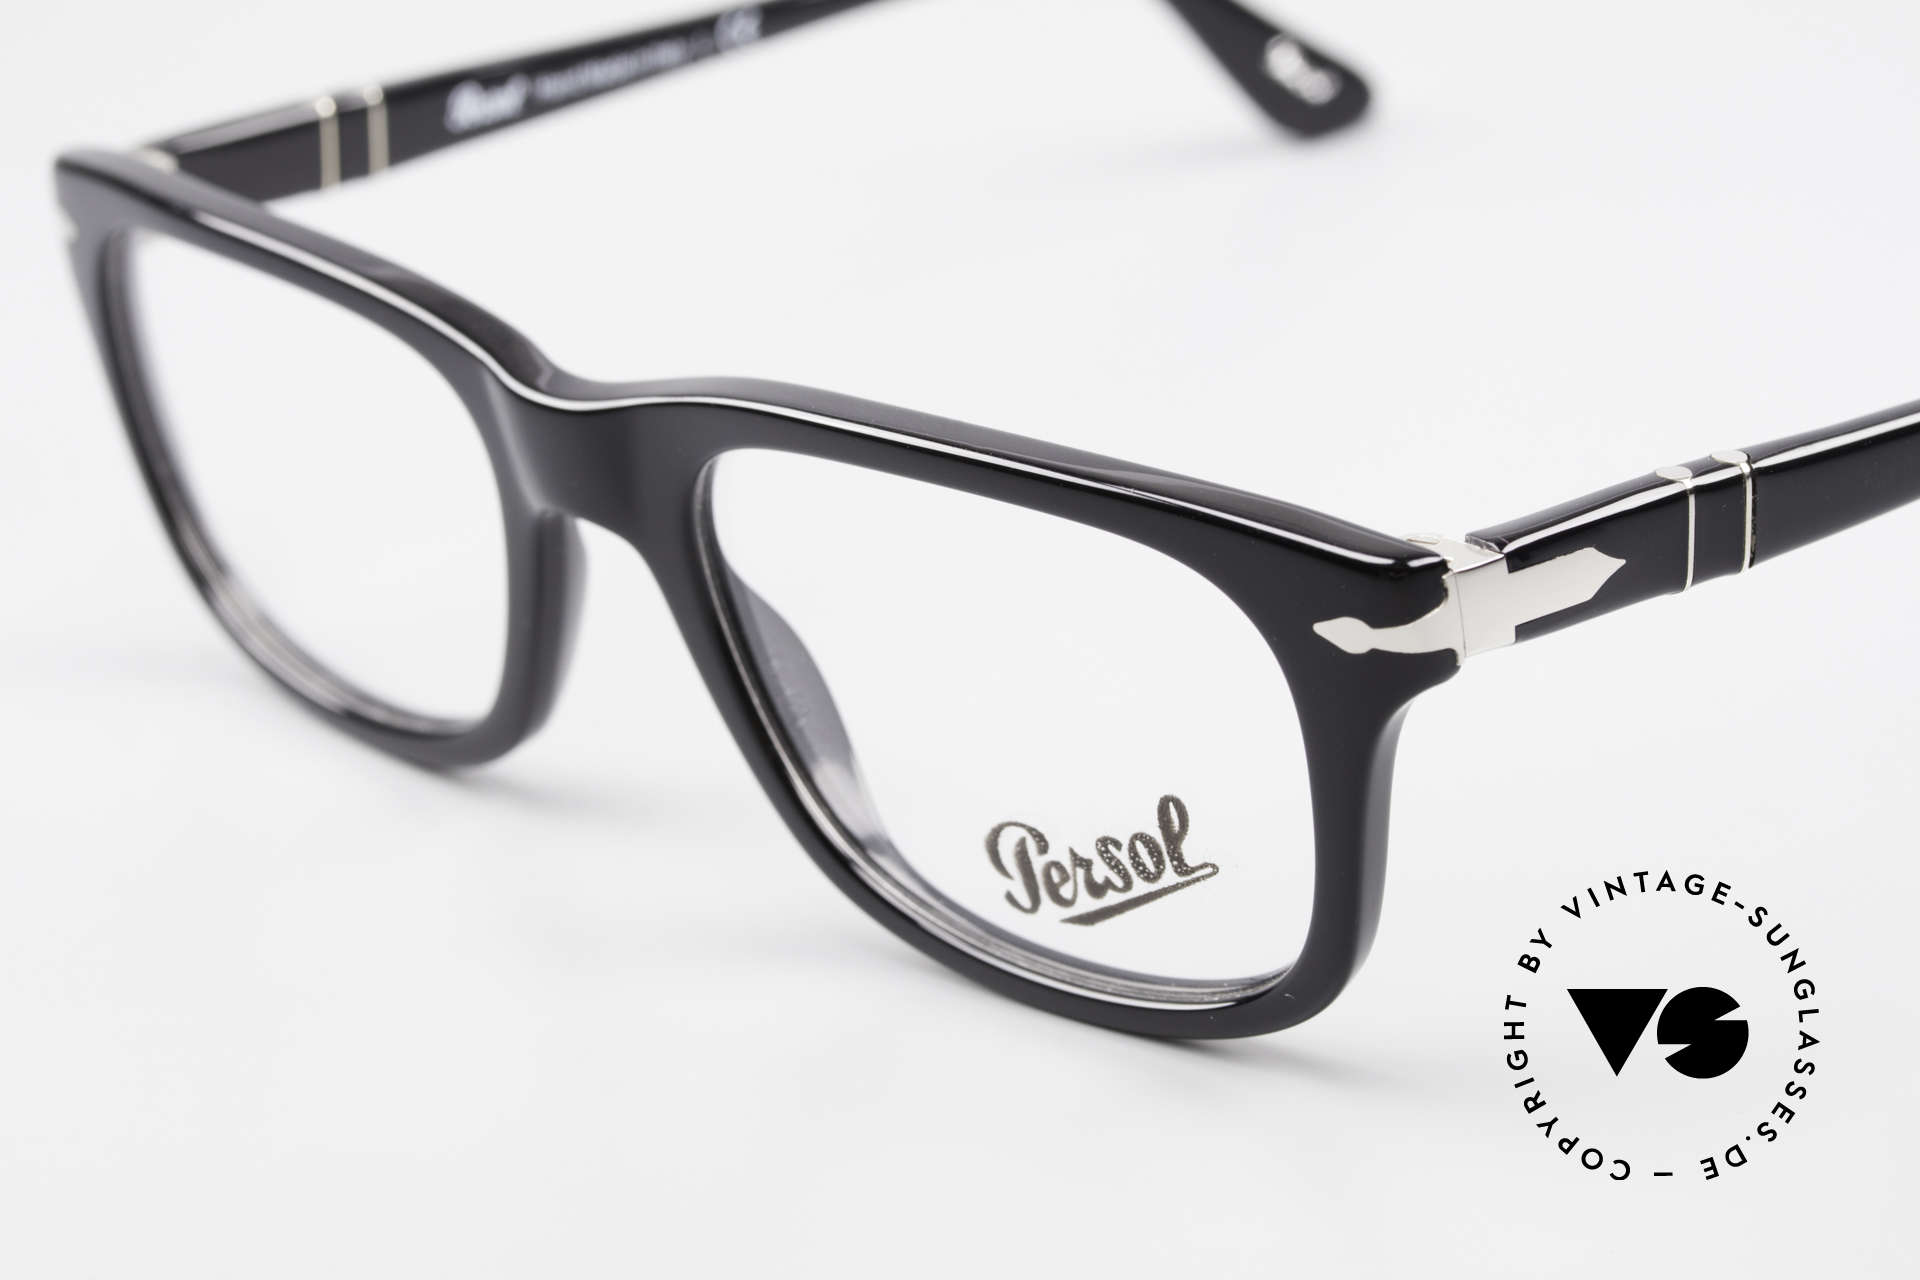 Persol 3029 Striking Persol Glasses Unisex, DEMOS can be replaced with lenses of any kind, Made for Men and Women